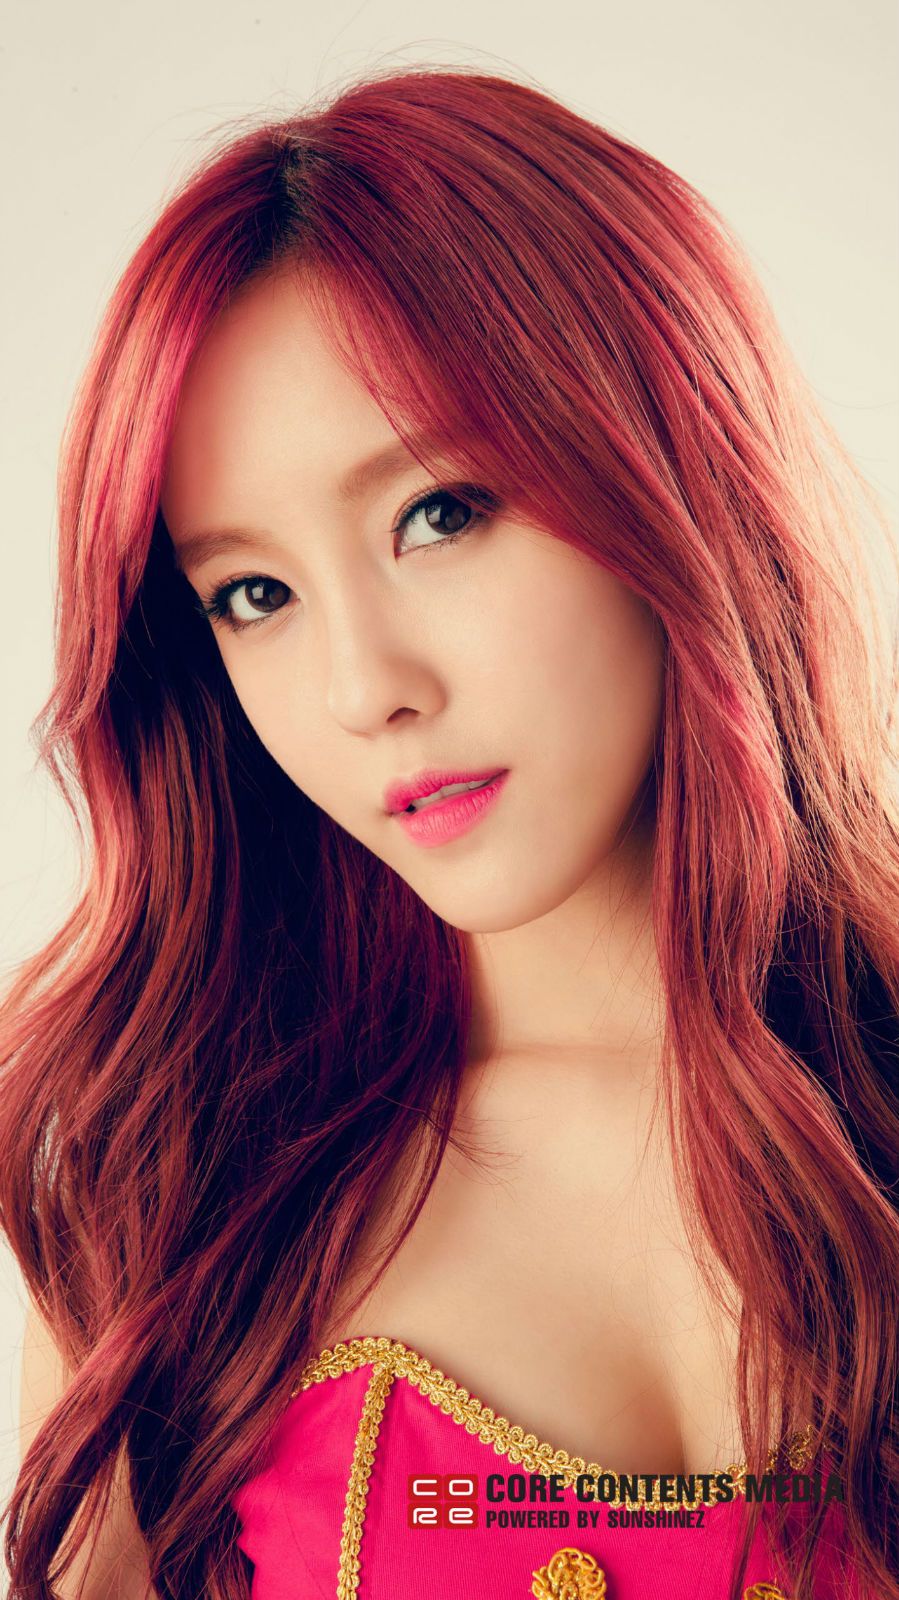 Hyomin Sexy and Hottest Photos , Latest Pics